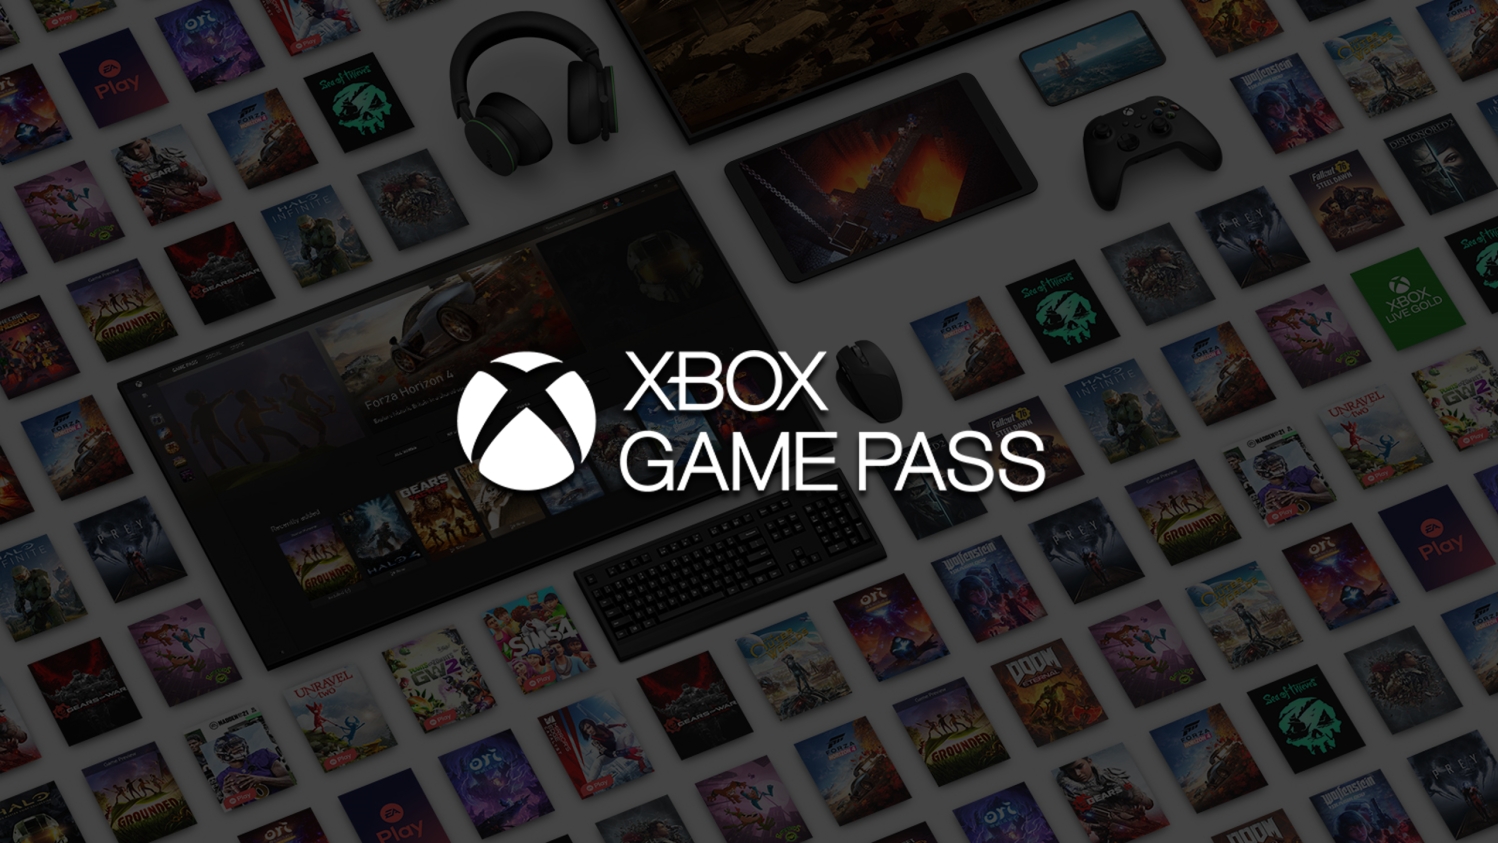 Exclusive: Microsoft is moving ahead with an Xbox Game Pass Family